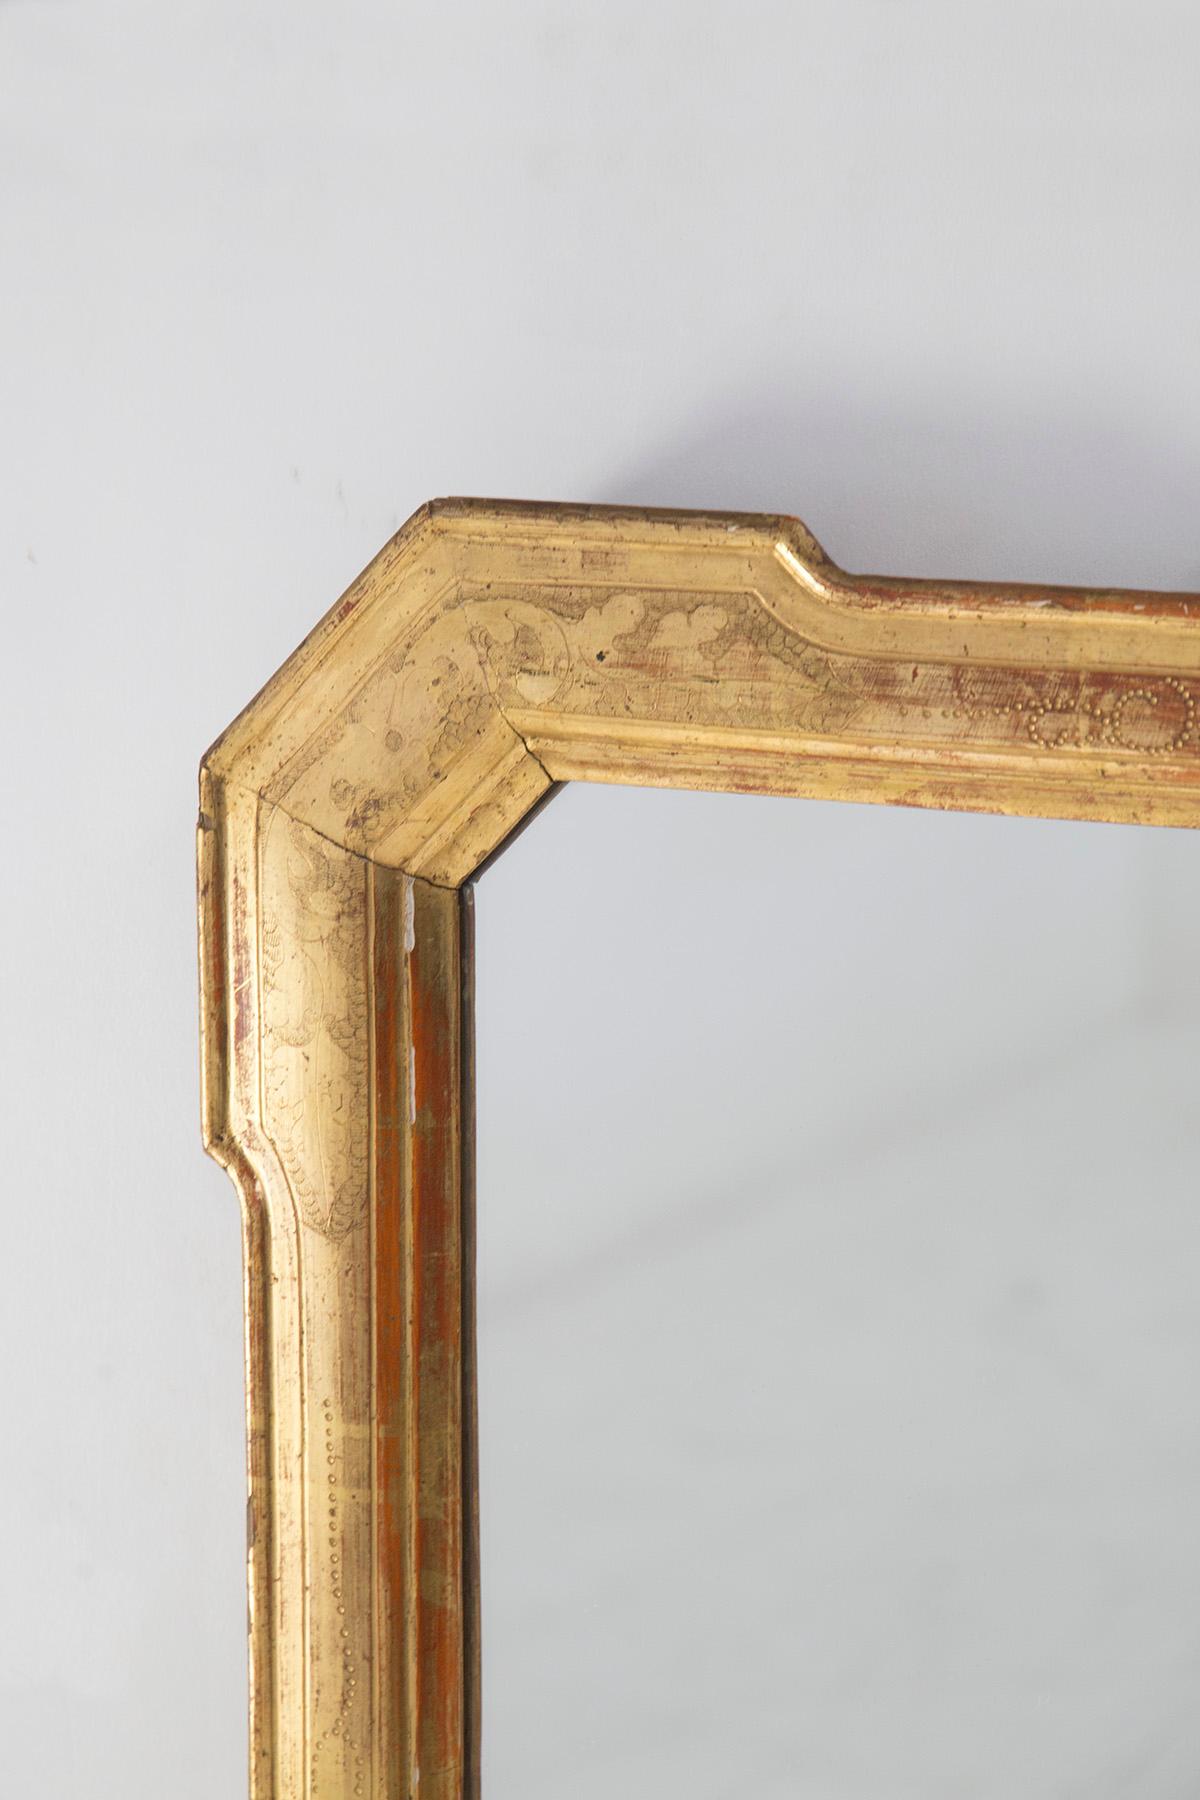 Splendid antique mirror dating from the 19th century, of fine French manufacture.
The mirror is a very beautiful and simple wall mirror with a very beautiful gilded wooden frame.
Its shape is rectangular, but the peculiarity lies in the